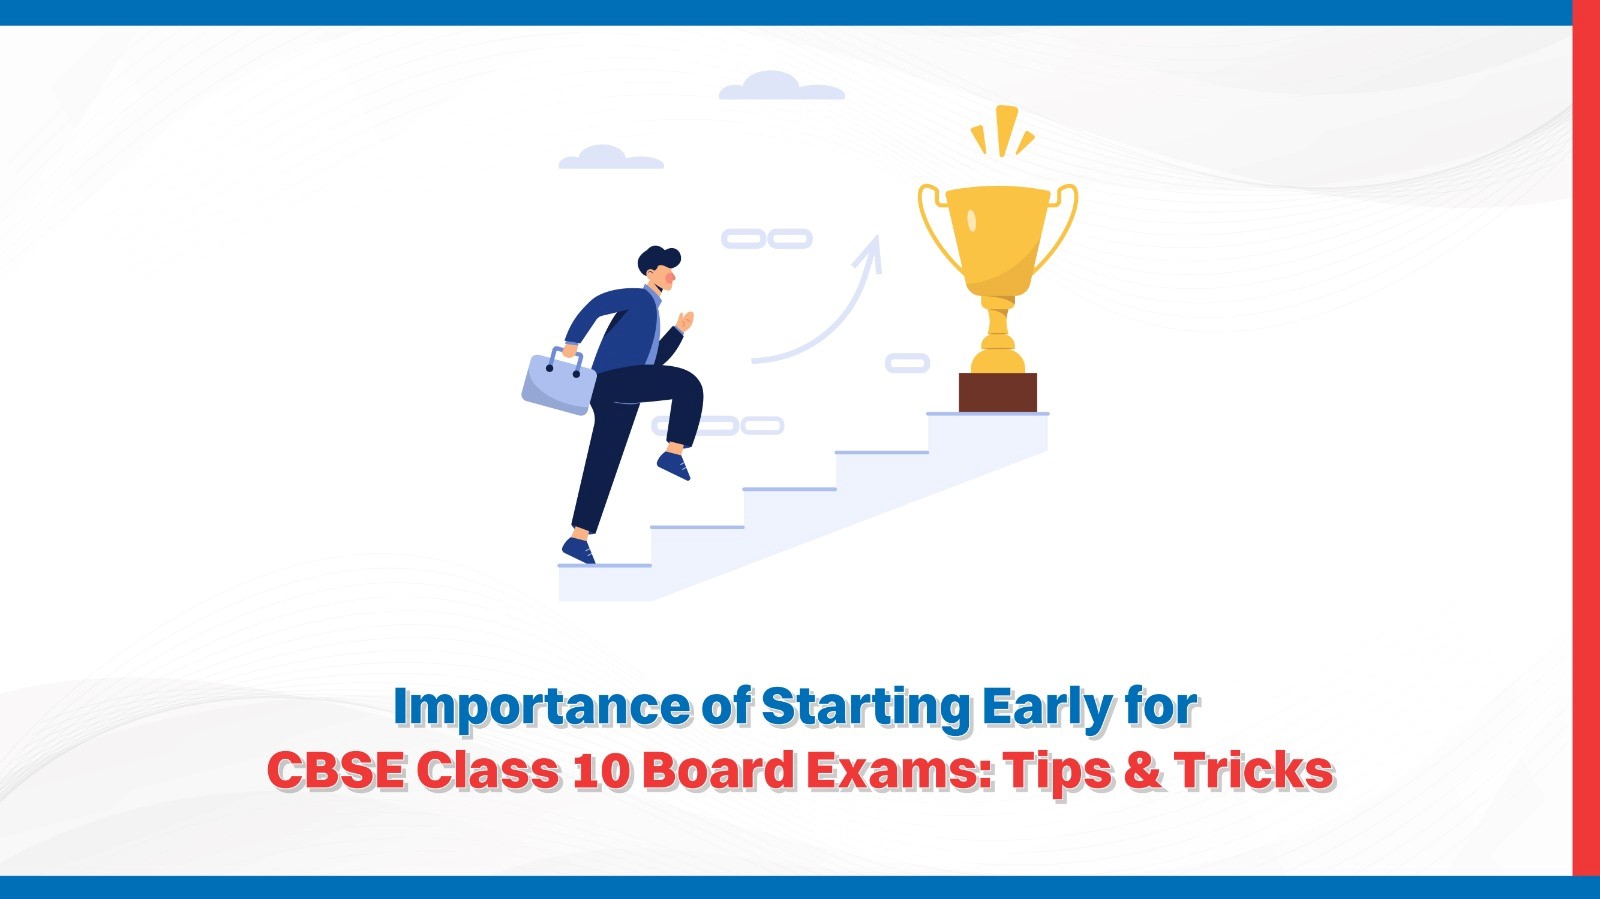 Importance of Starting Early for CBSE Class 10 Board Exams: Tips & Tricks